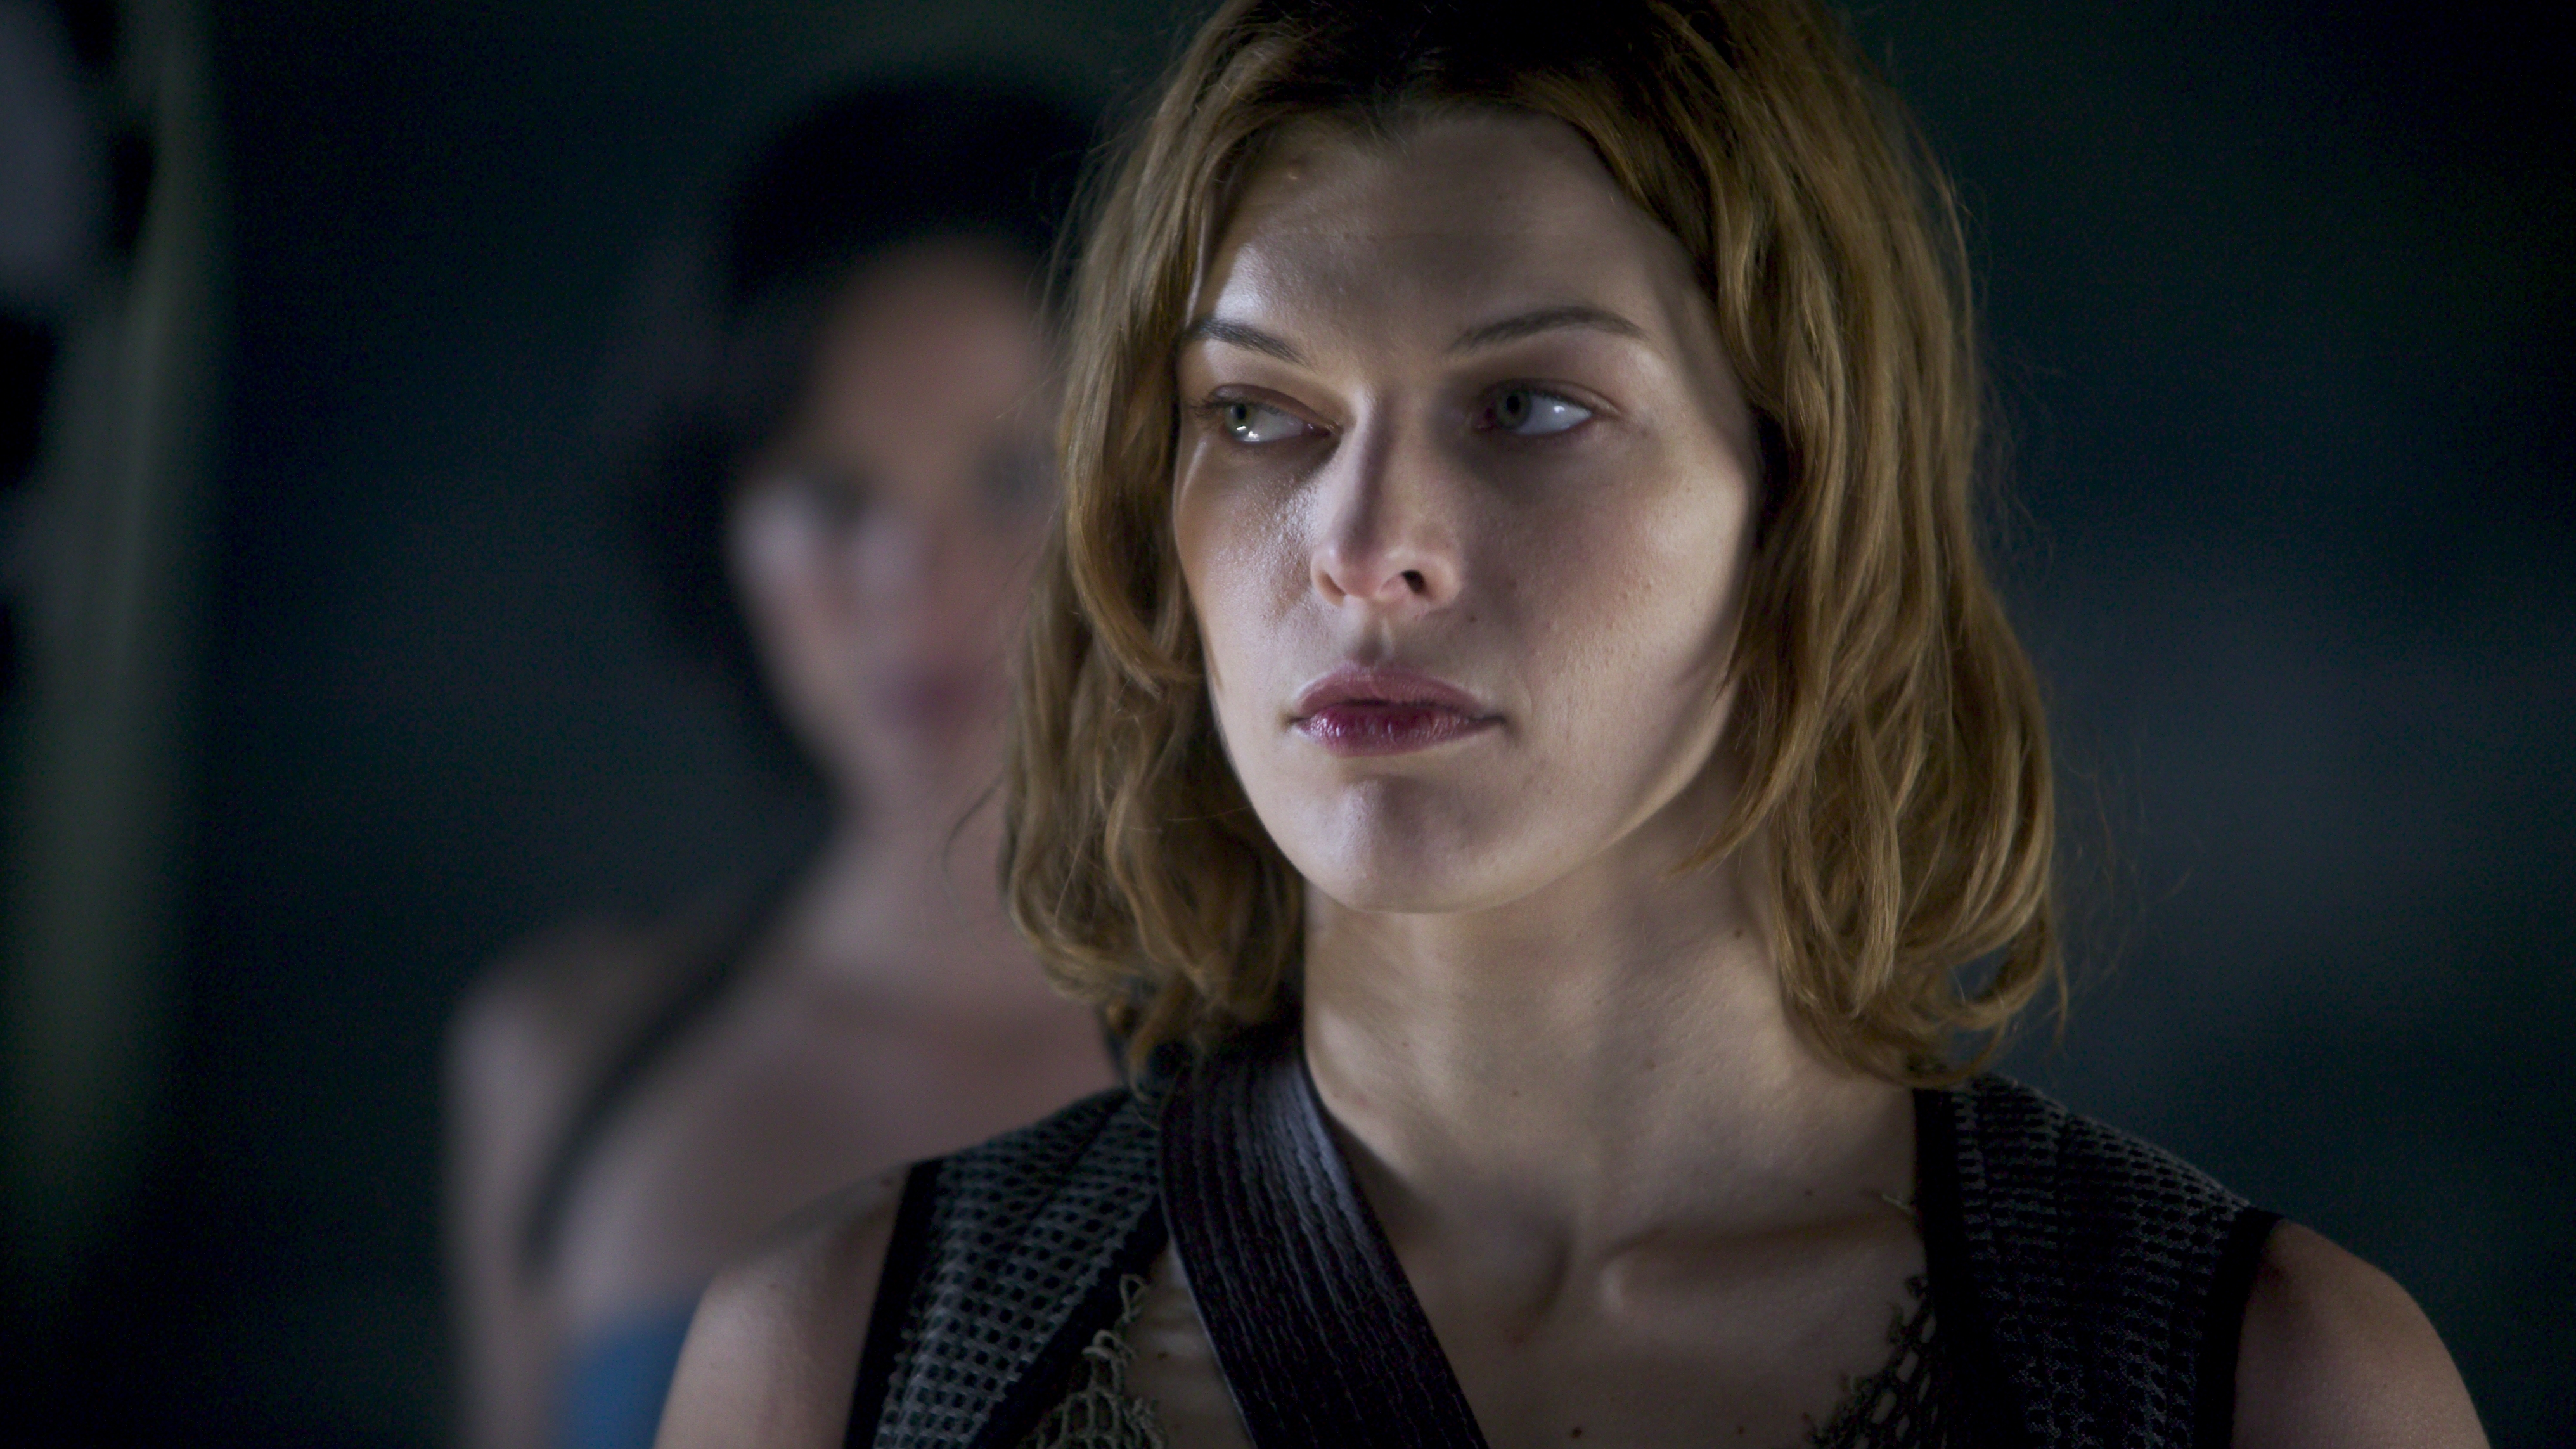 Amazing Resident Evil: Apocalypse Pictures & Backgrounds